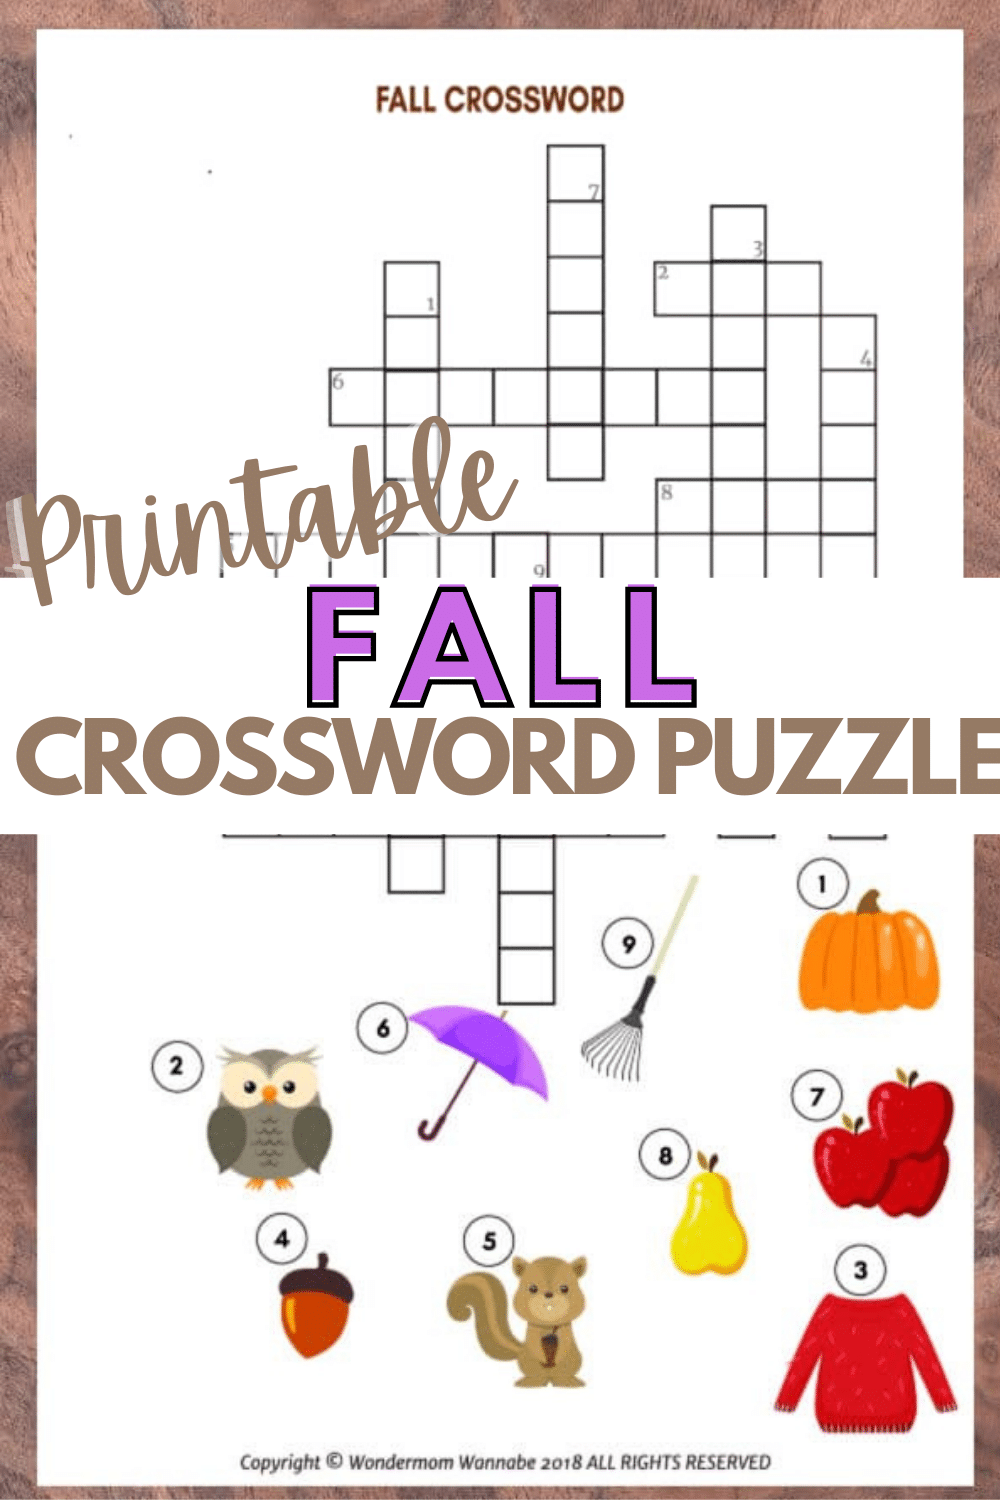 This printable fall crossword puzzle for kids is a fun educational activity that children in elementary school will enjoy. #fall #crosswordpuzzle #printables via @wondermomwannab